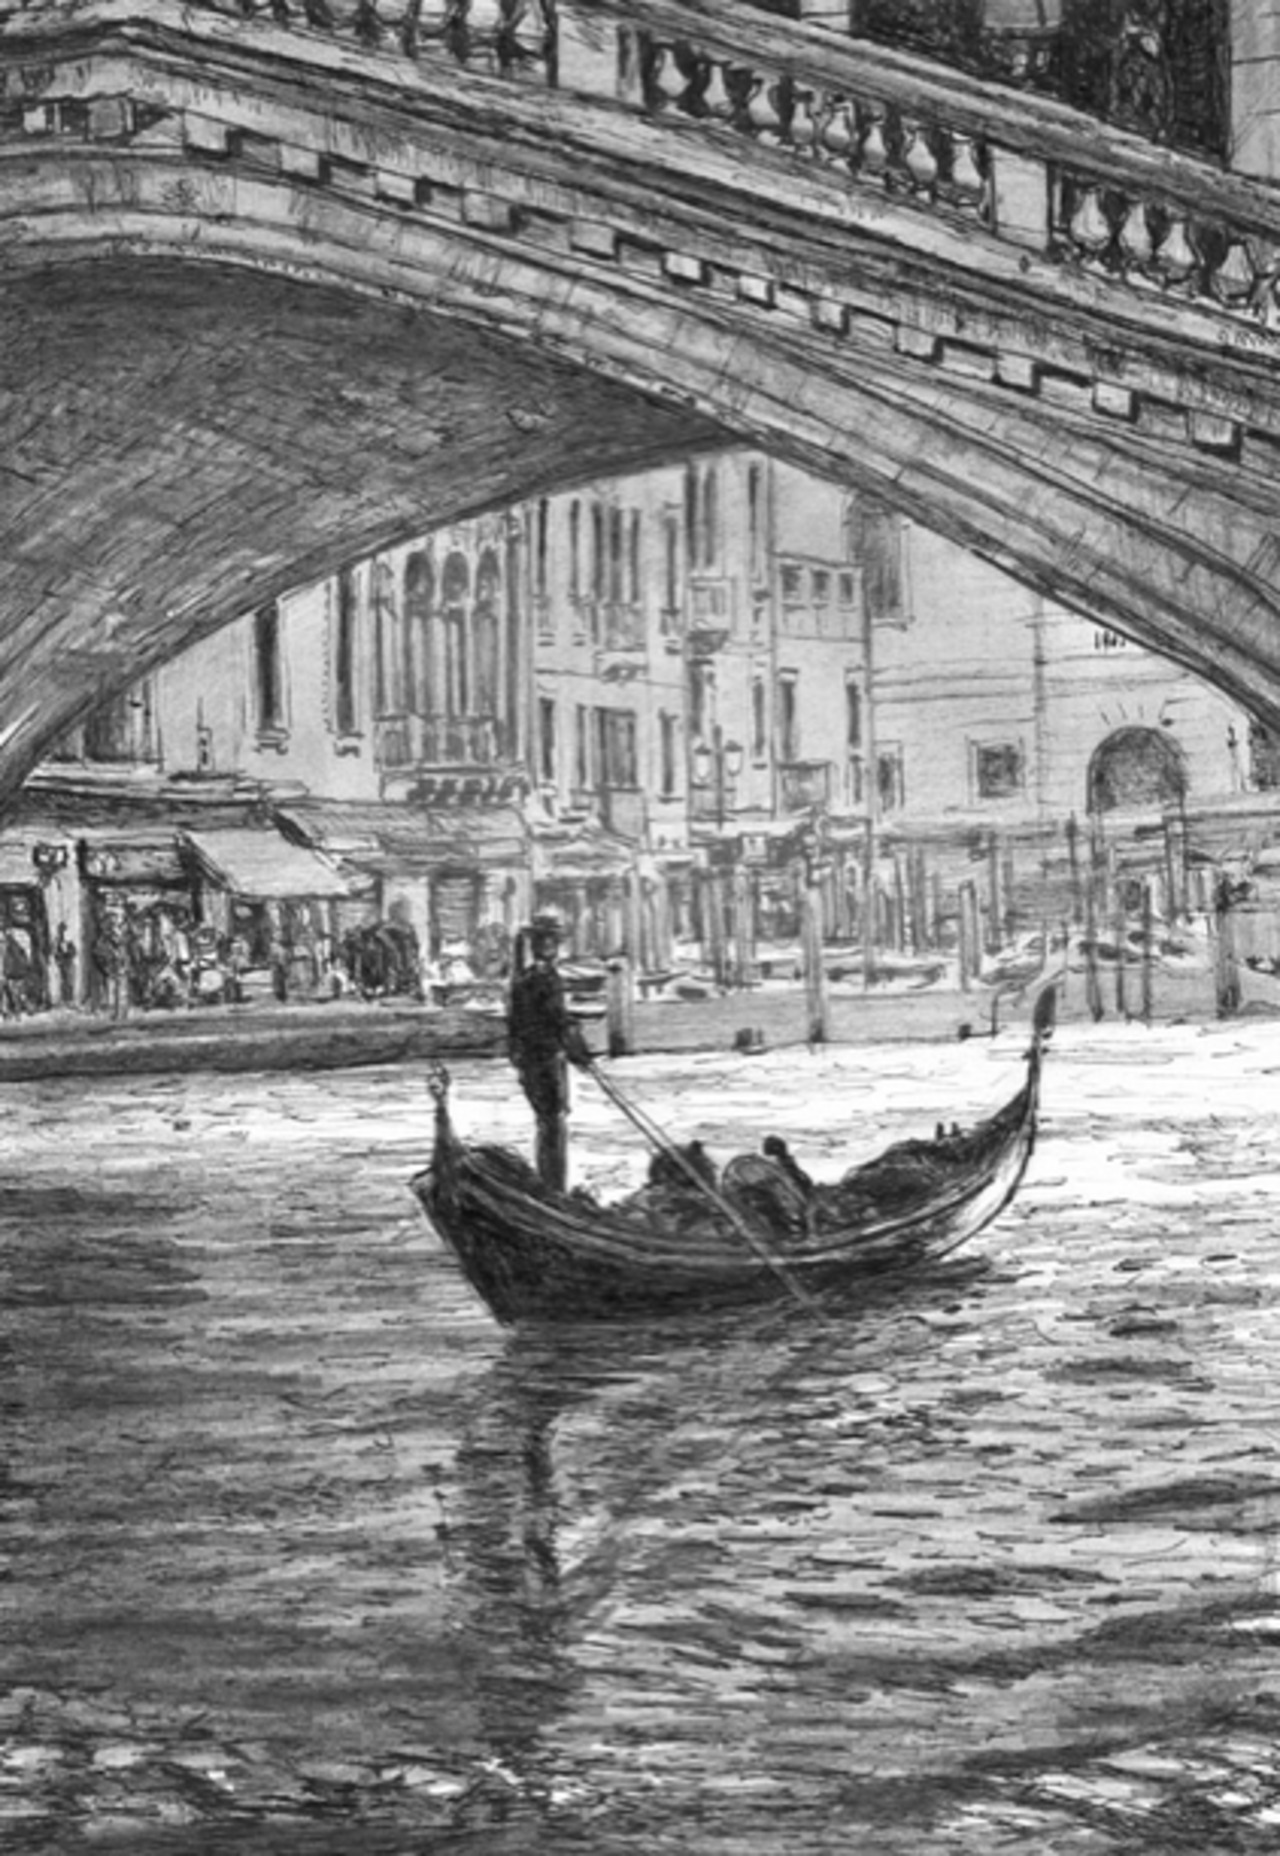 Share your love of #art this #ValentinesDay http://www.stephenwiltshire.co.uk/newsletter/Valentines_Day_2015.html #romance #love #Venice #gondola http://t.co/Rikl56Nq0G